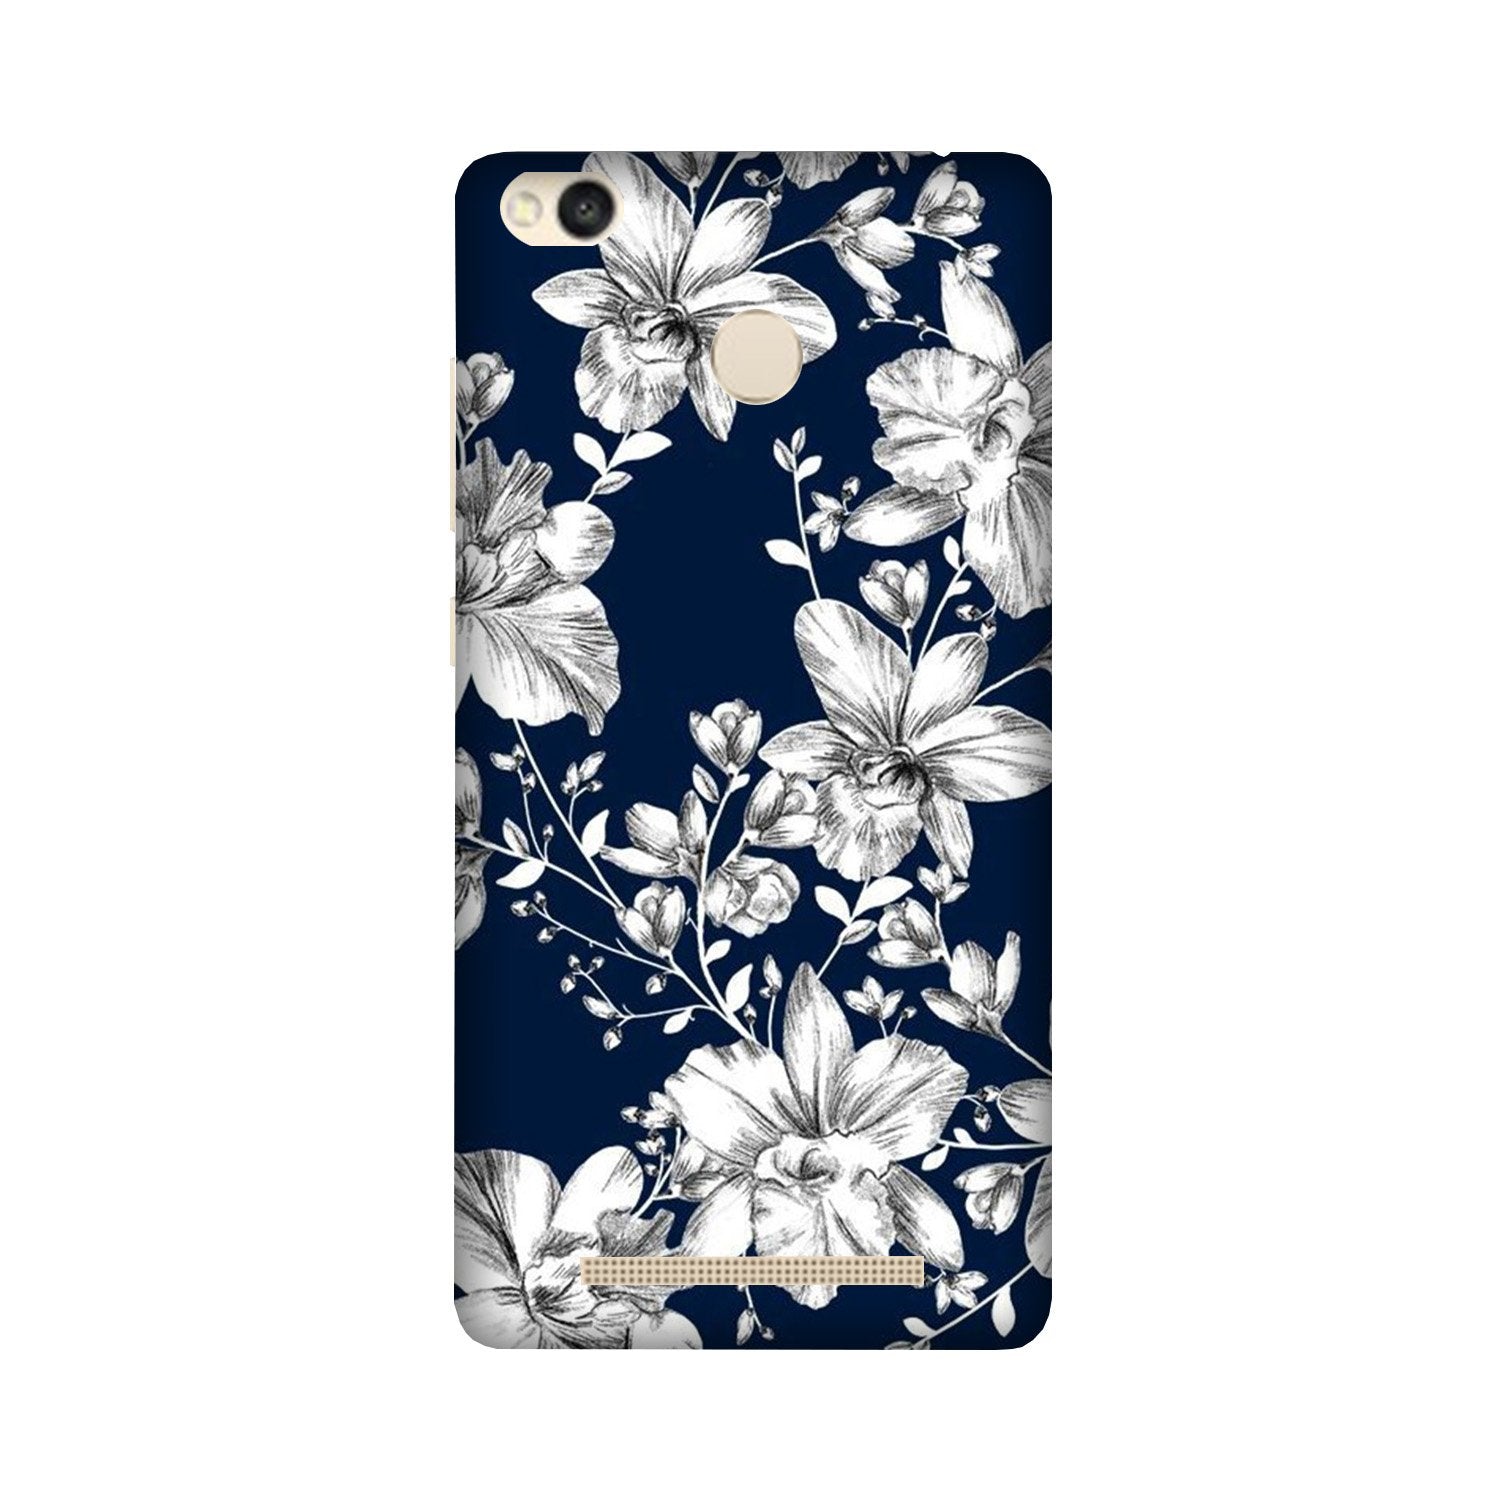 White flowers Blue Background Case for Redmi 3S Prime